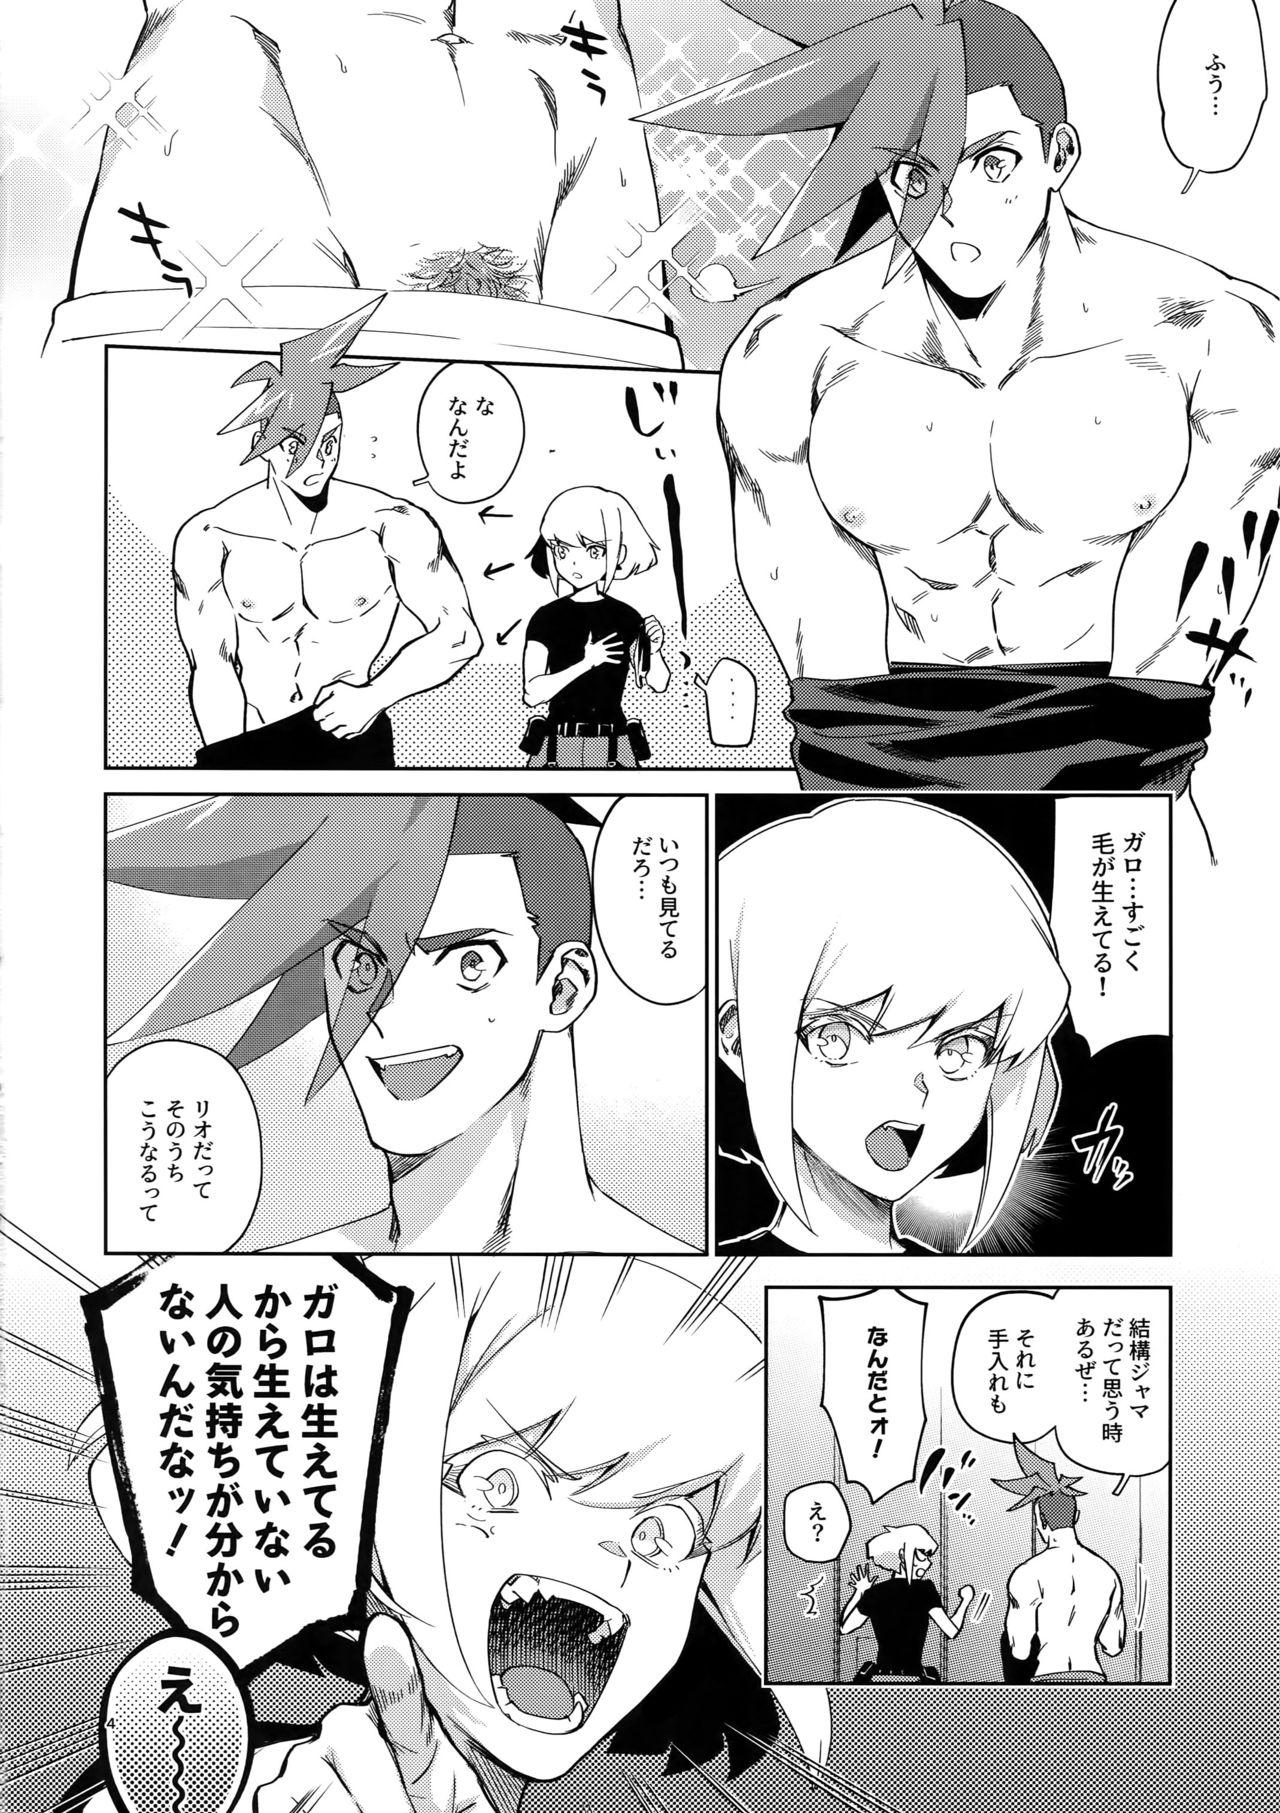 Home One and Only - Promare Amatoriale - Page 3